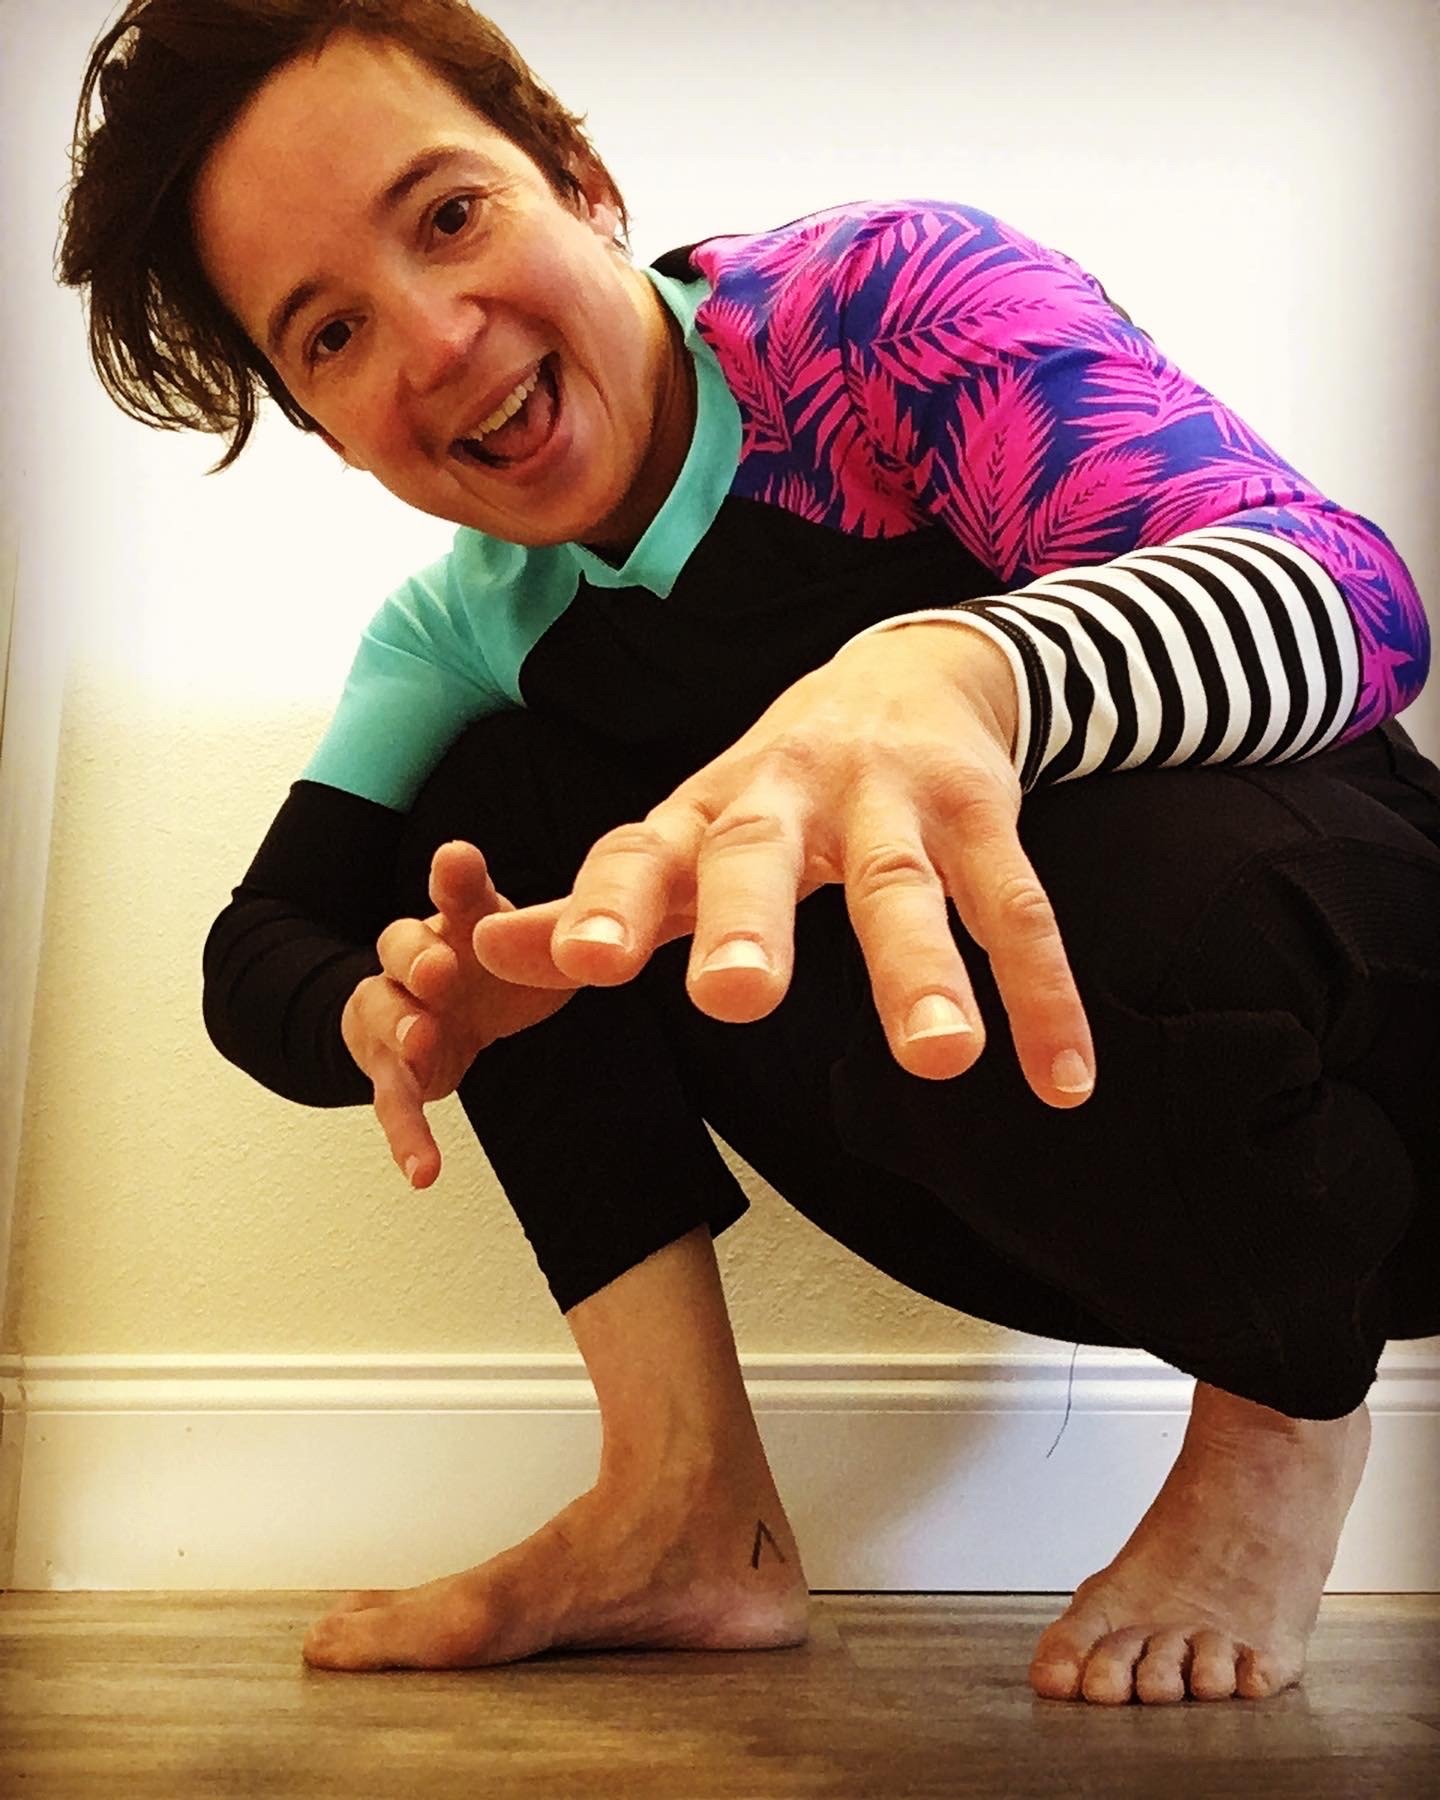 Wendy Kinal is coming in from Boulder, CO for this year's Boston Women's Workshop.  Wendy will be bringing an extensive movement background to share some unique play activities, mobility work, and 'Theatrix' for parkour participants! Come play, train